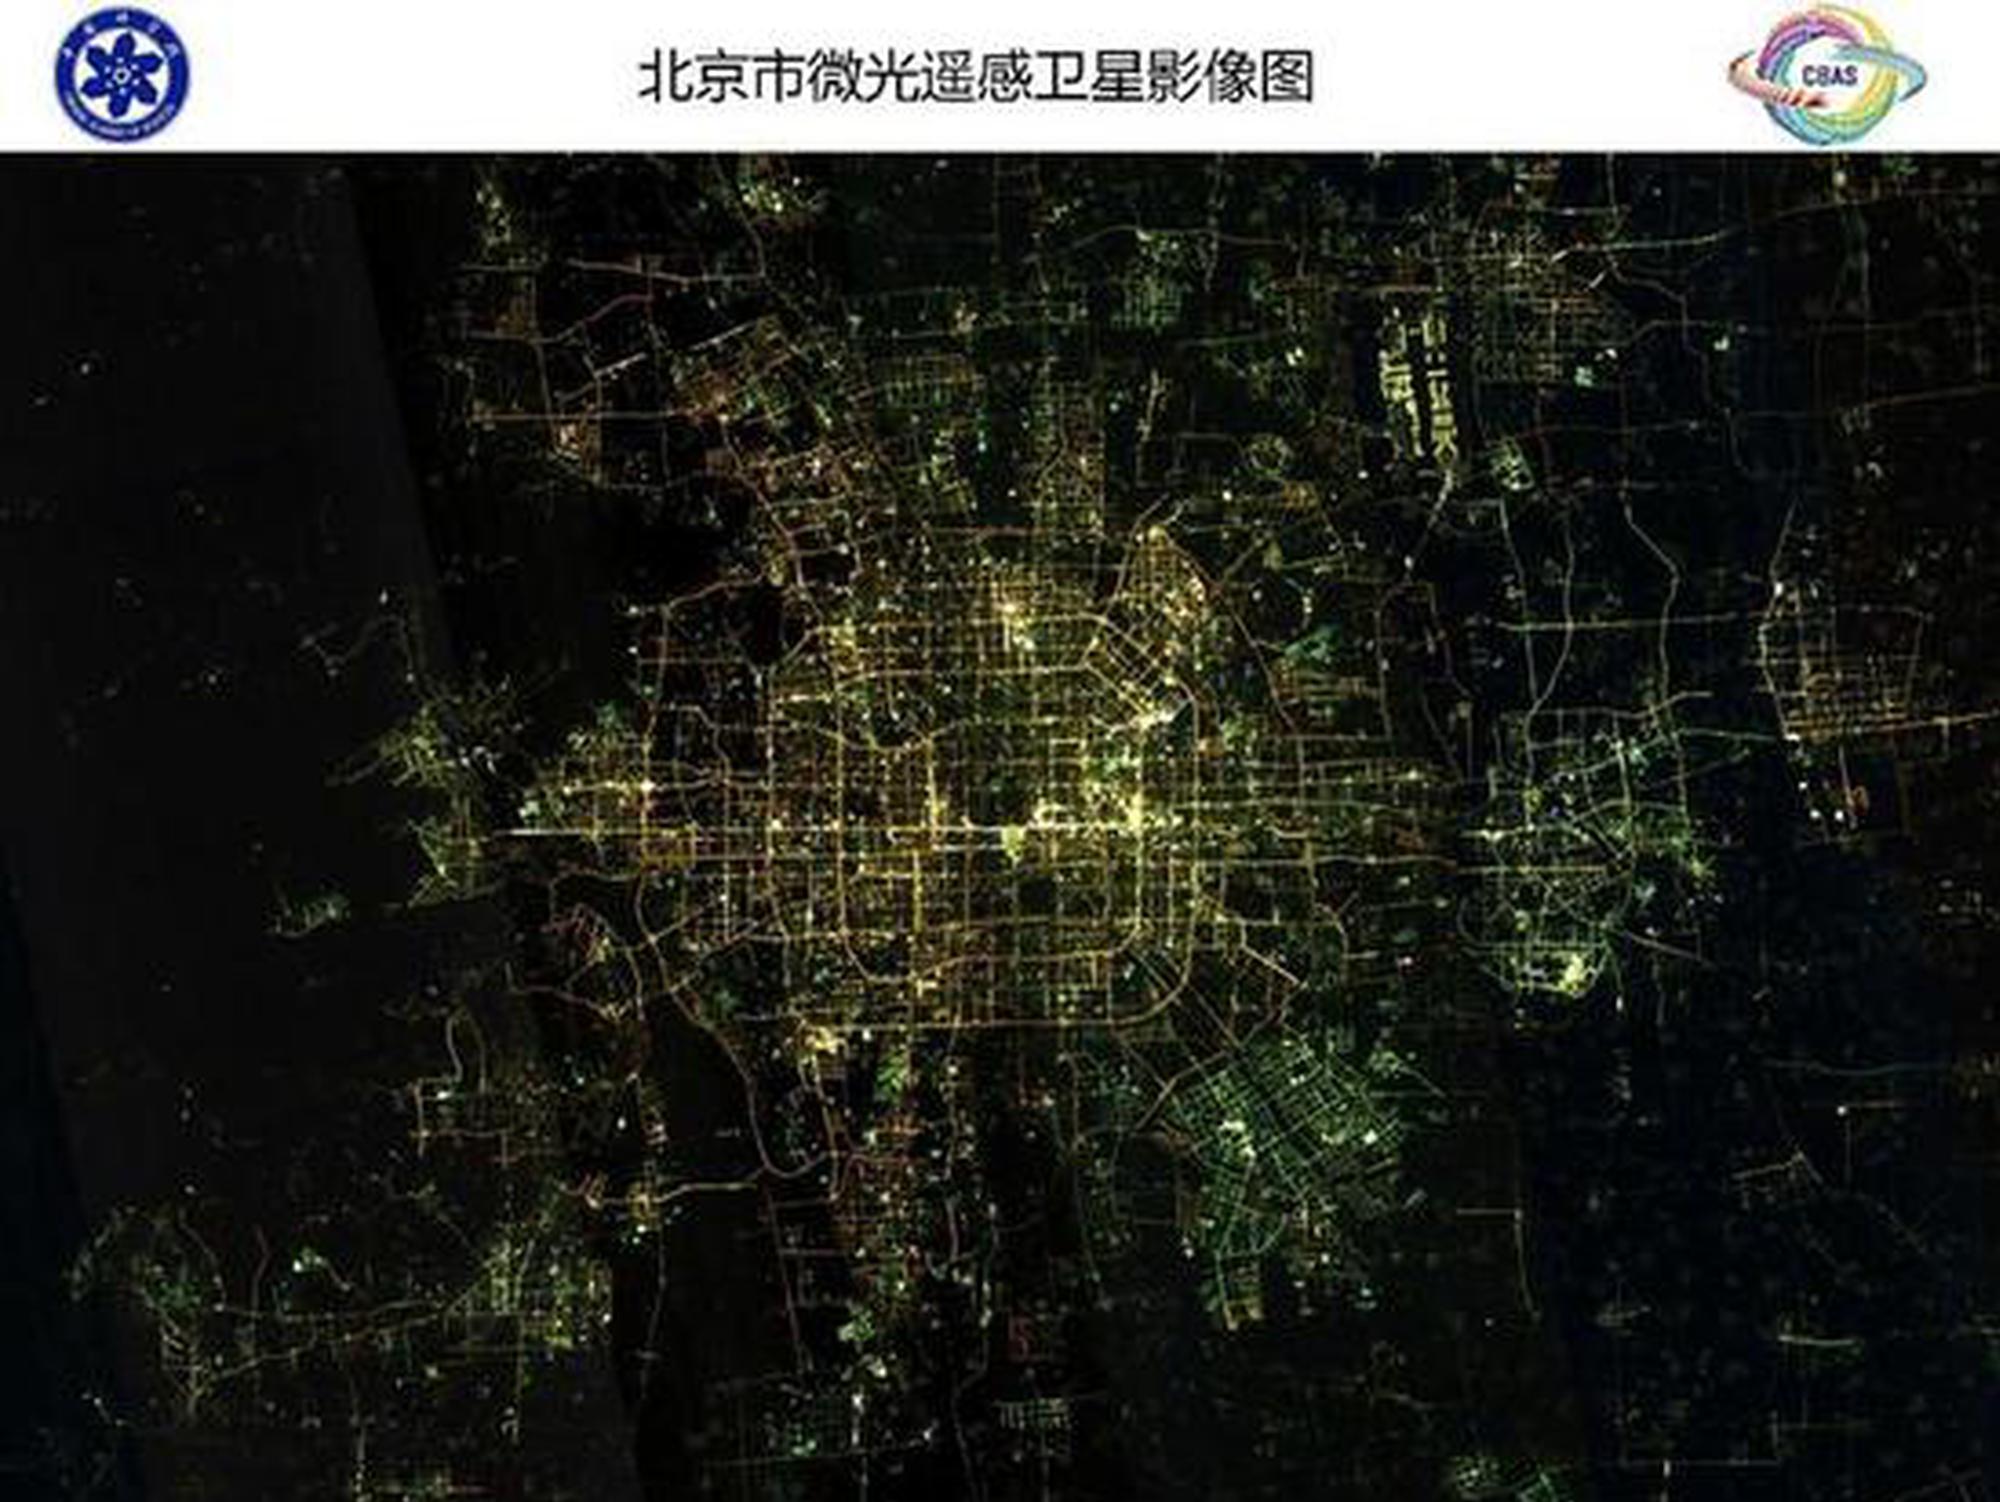 China releases first images taken by SDGSAT-1